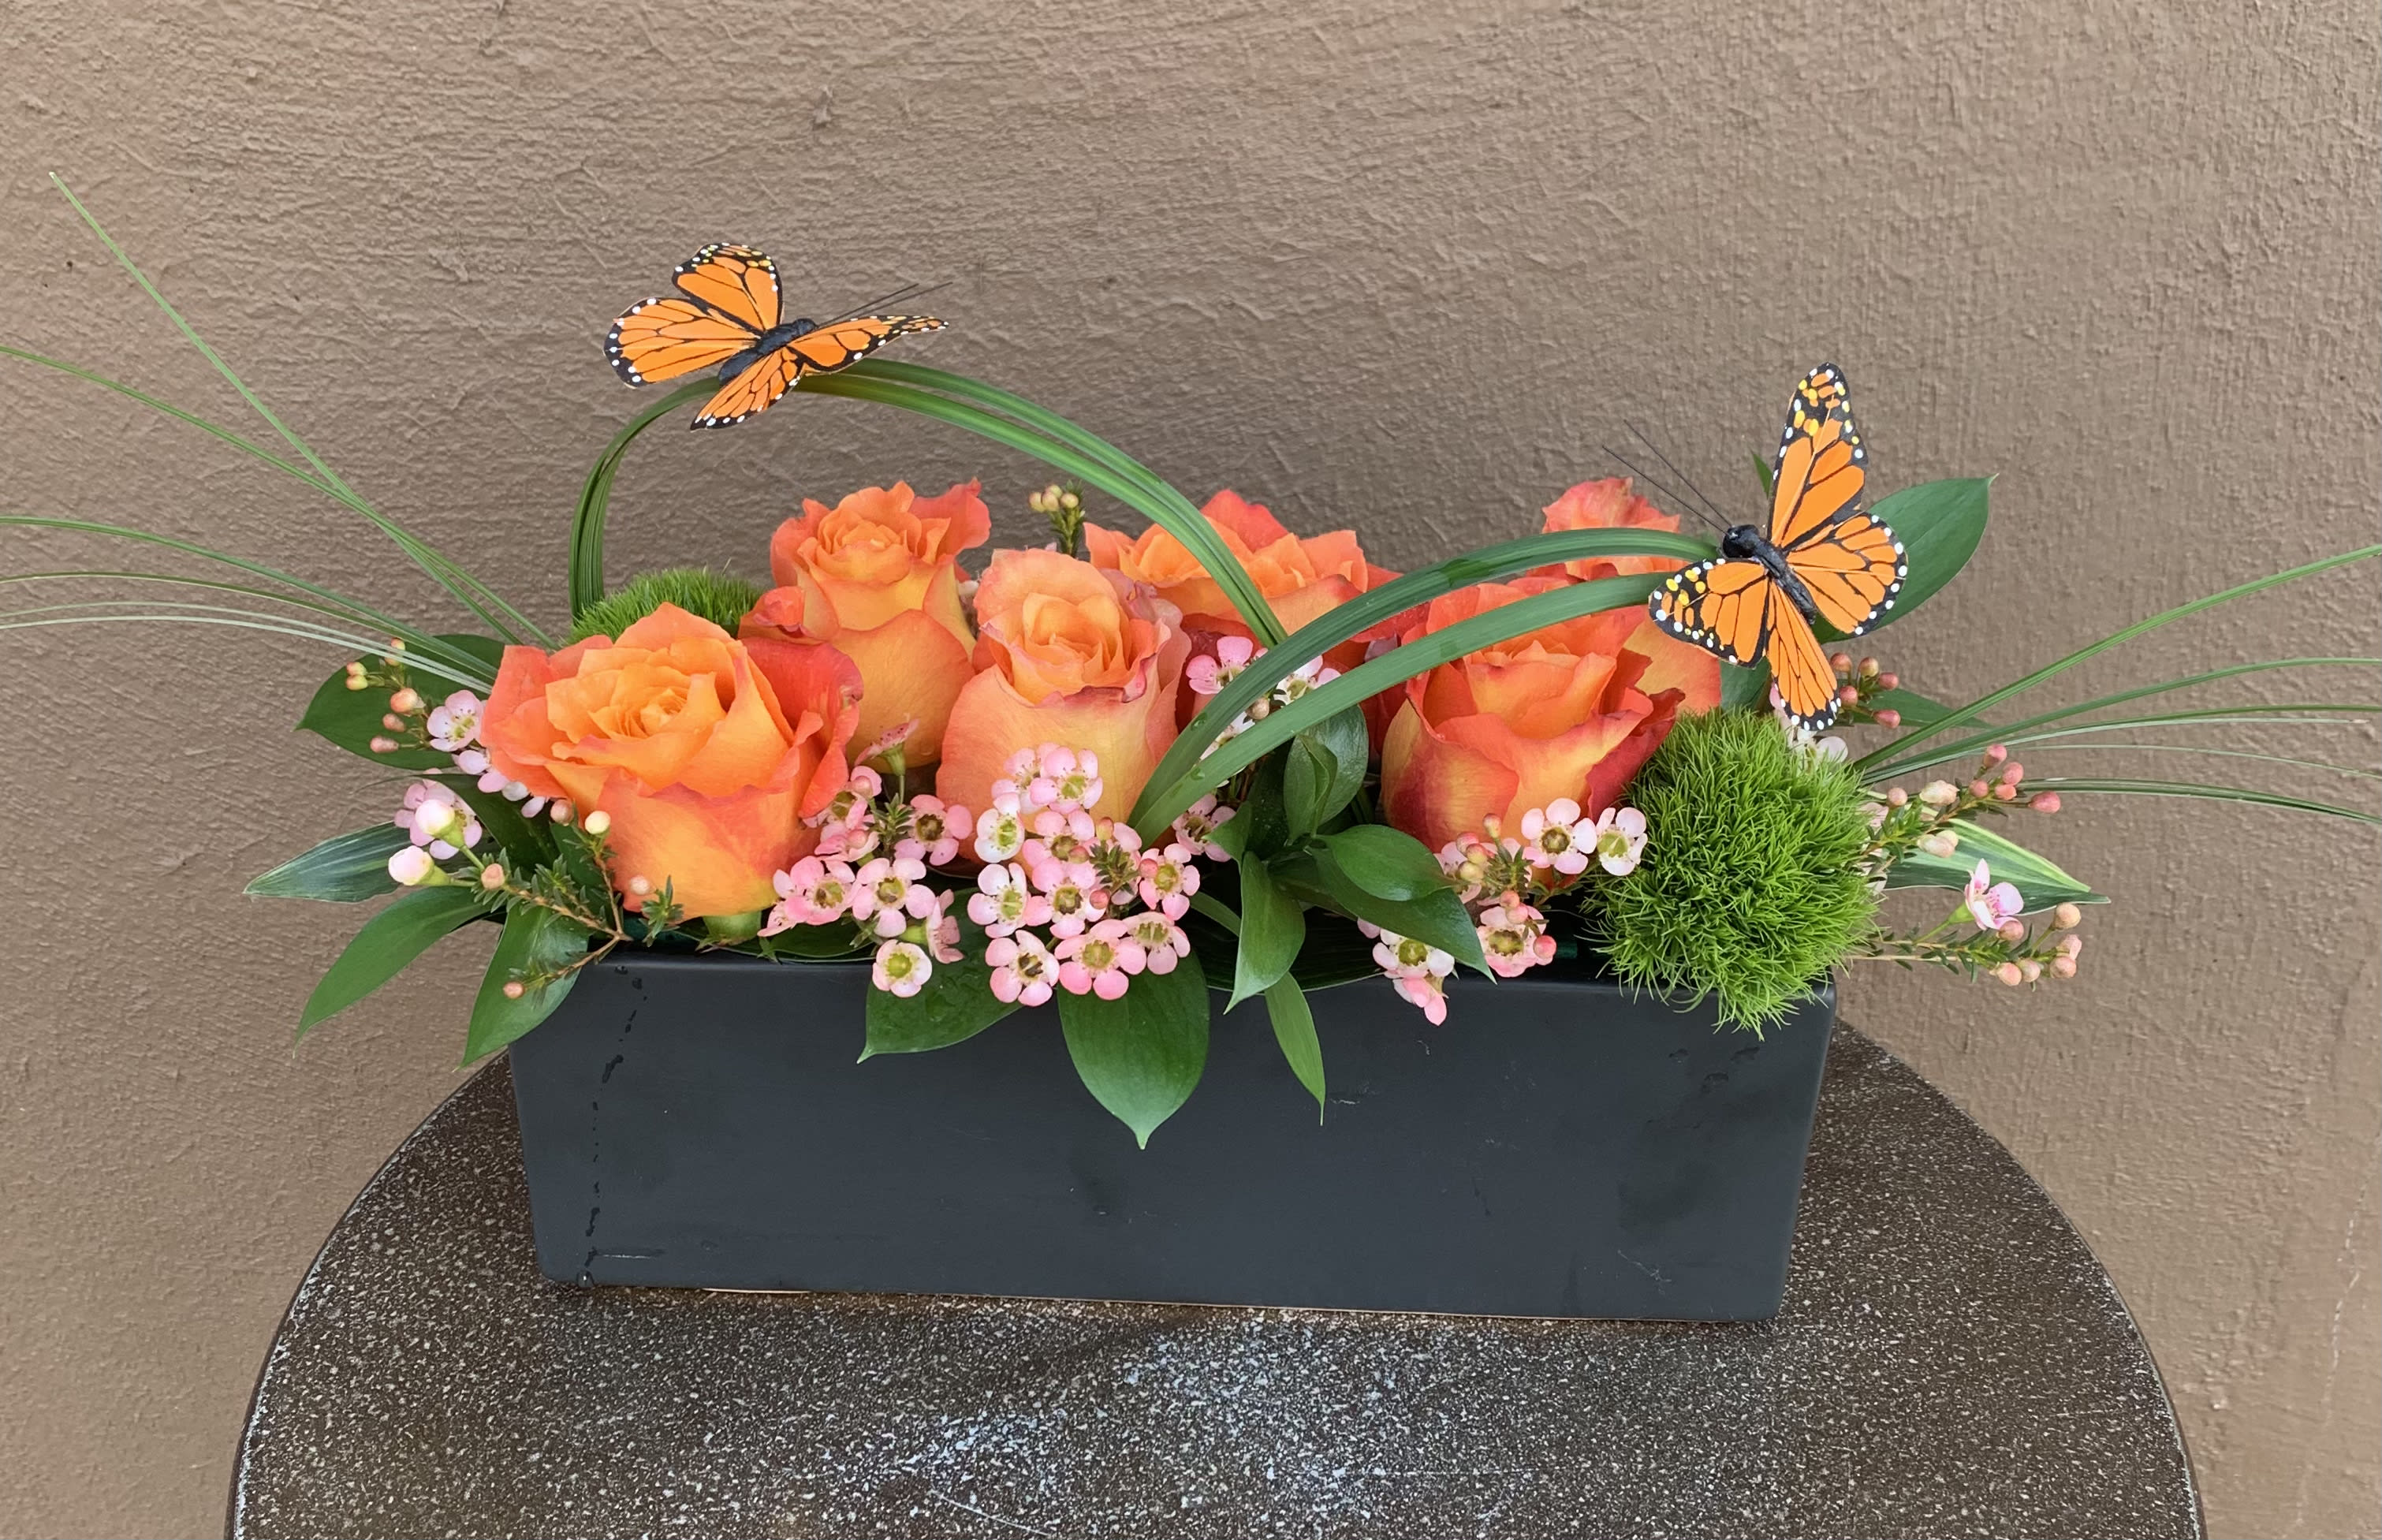 Free Spirit - 6 free spirit roses in a low black ceramic rectangle with beautiful matching accents.